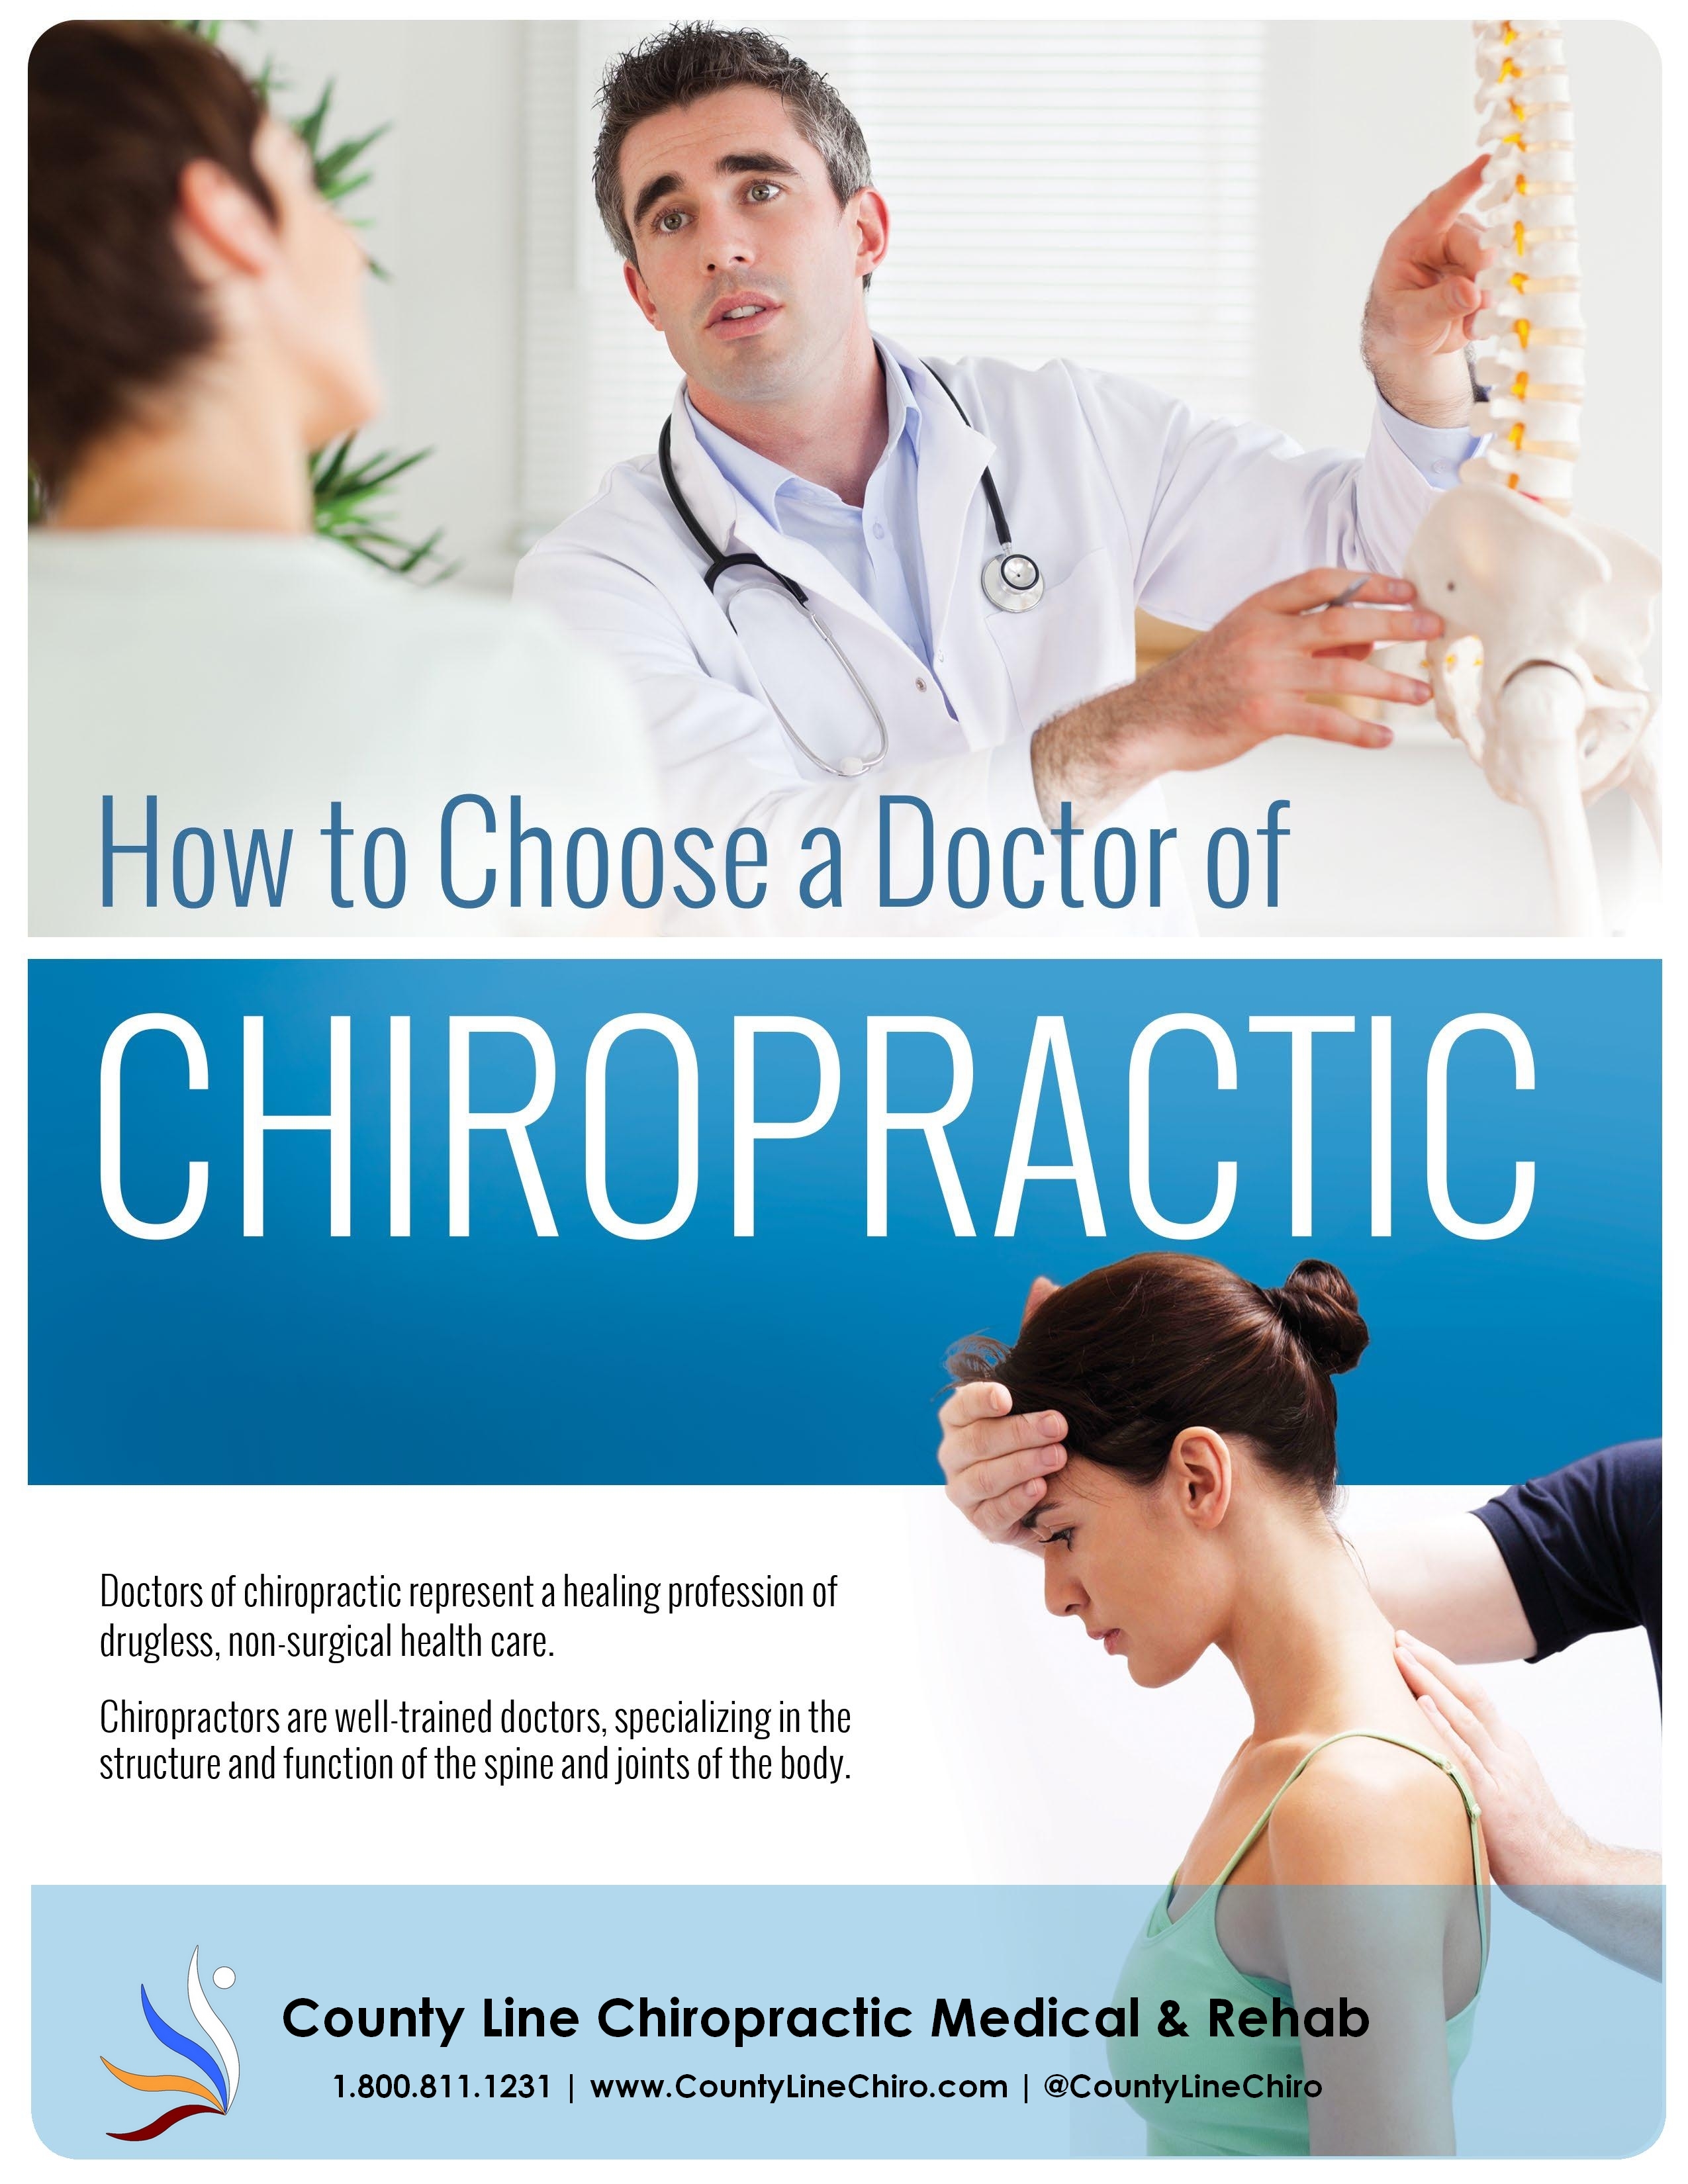 How to Choose a Doctor of Chiropractic